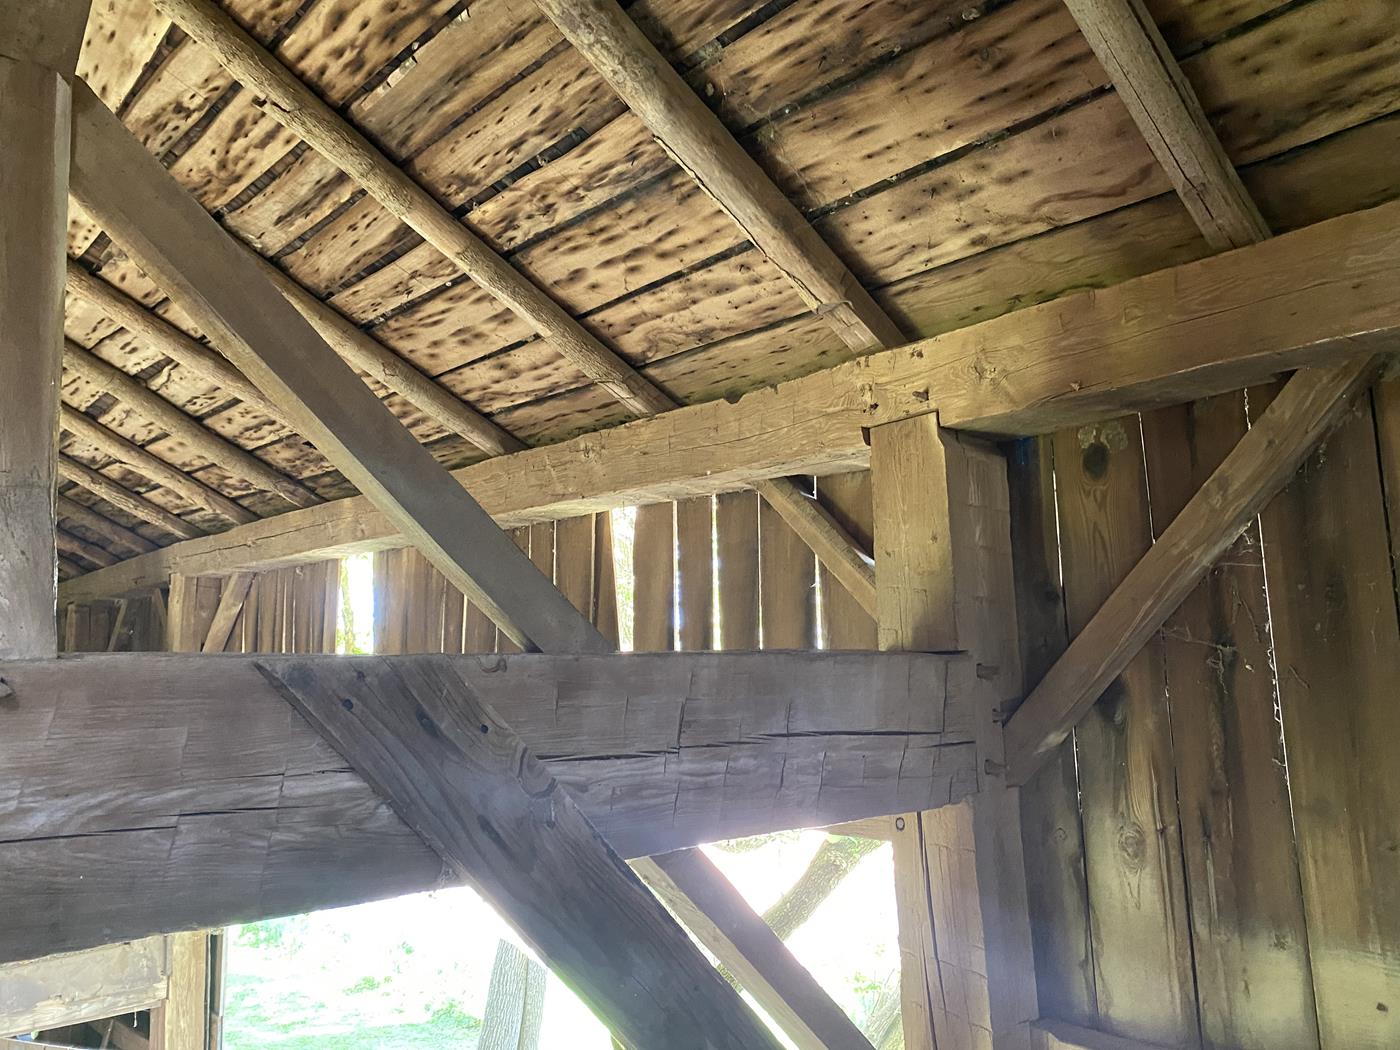 https://www.ohiovalleybarnsalvage.com/images/Historic Scott Salvaged Barn Frame - Your Source For White Oak Hand-Hewn Timbers